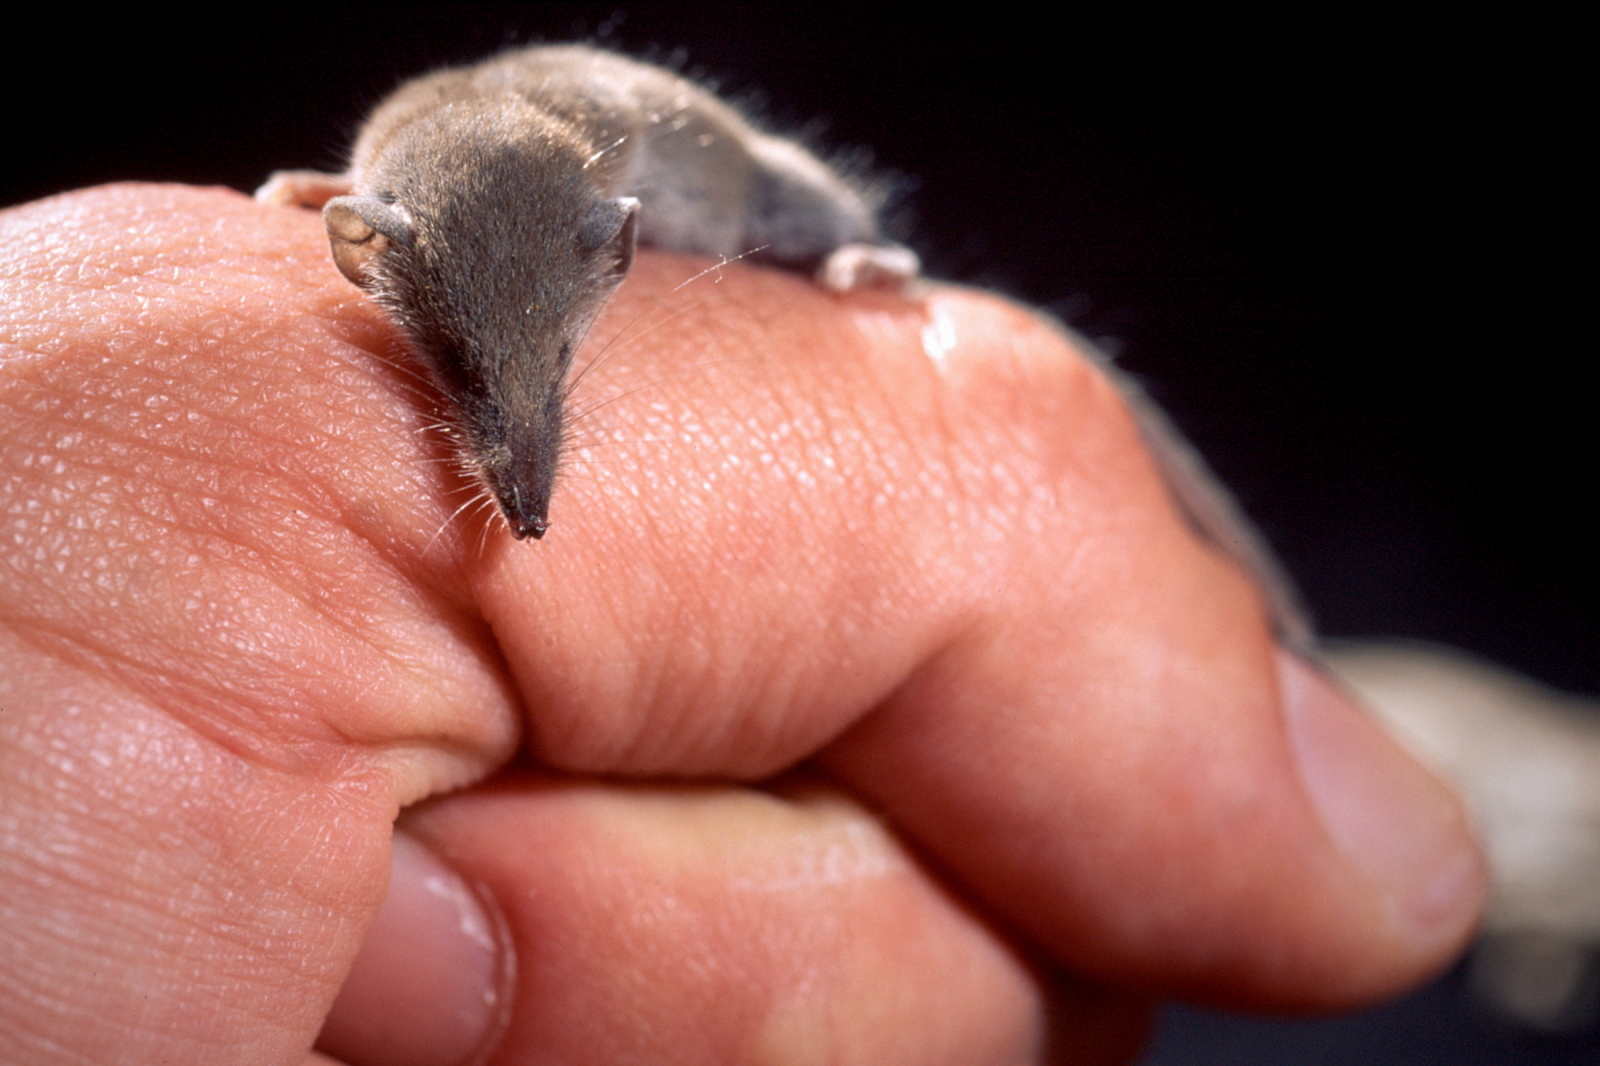 Is the Etruscan shrew an endangered species?